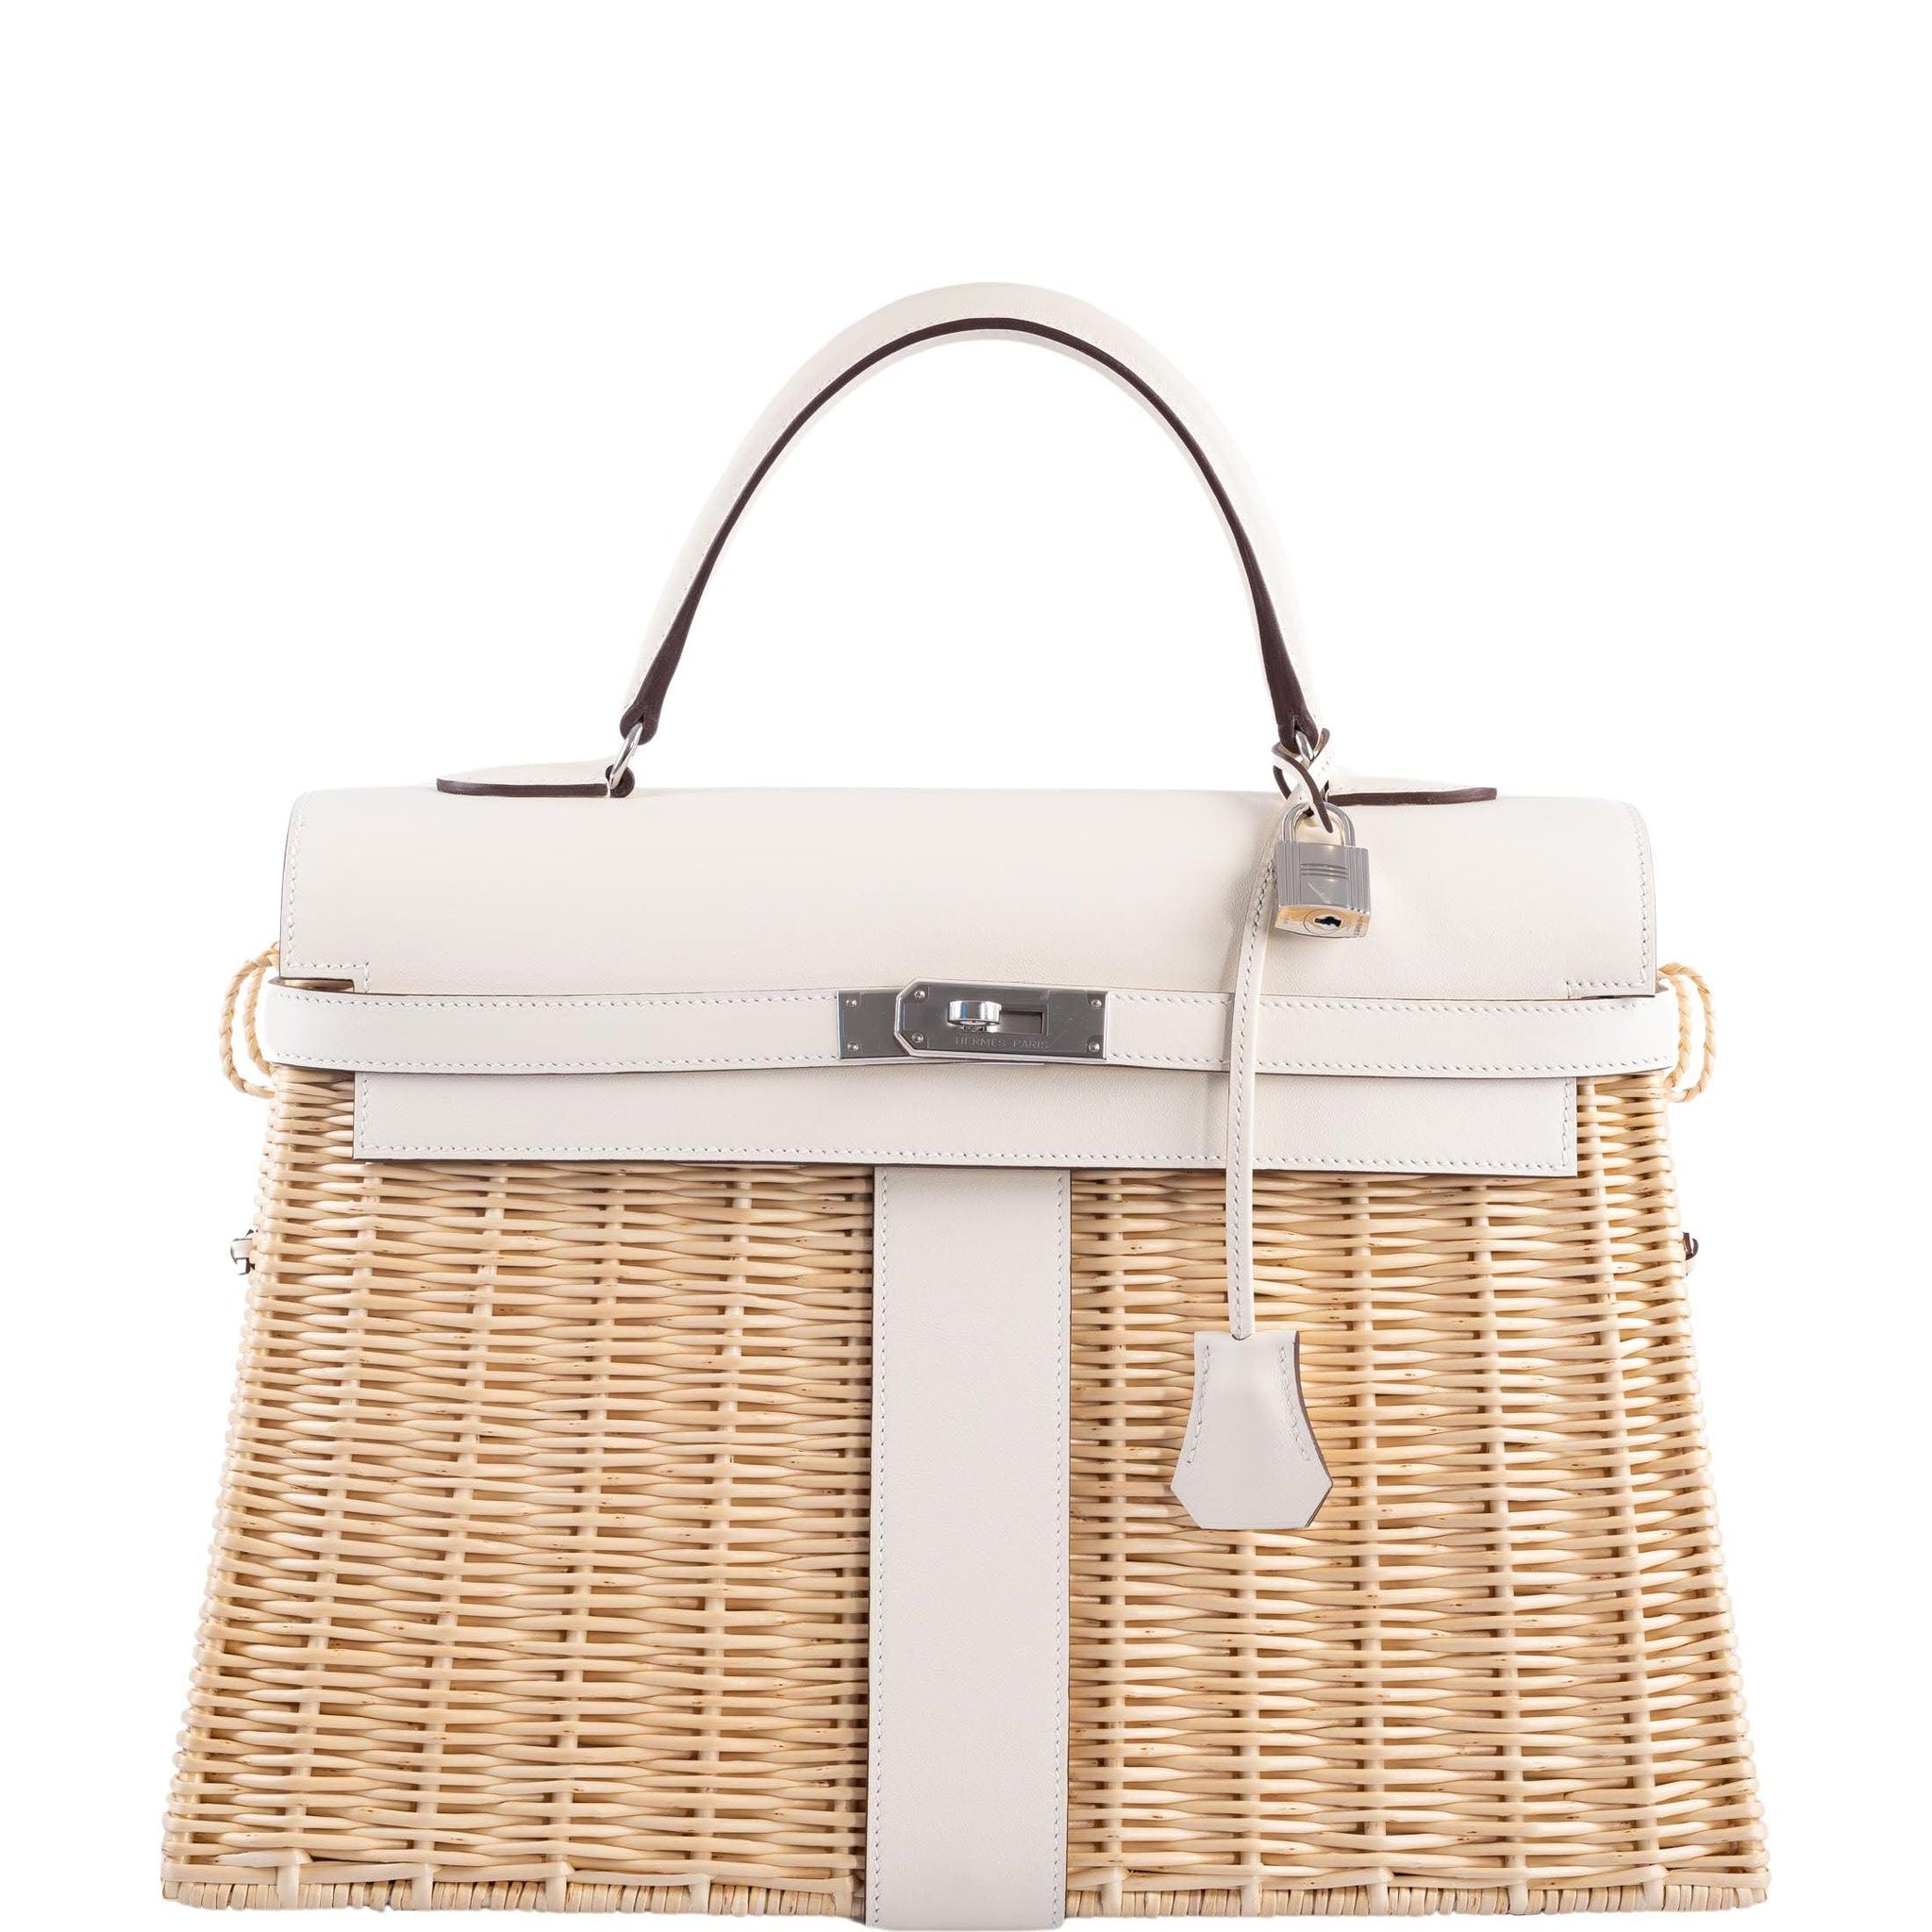 Hermes Kelly Limited Edition Picnic Mini Vert Verone Swift and